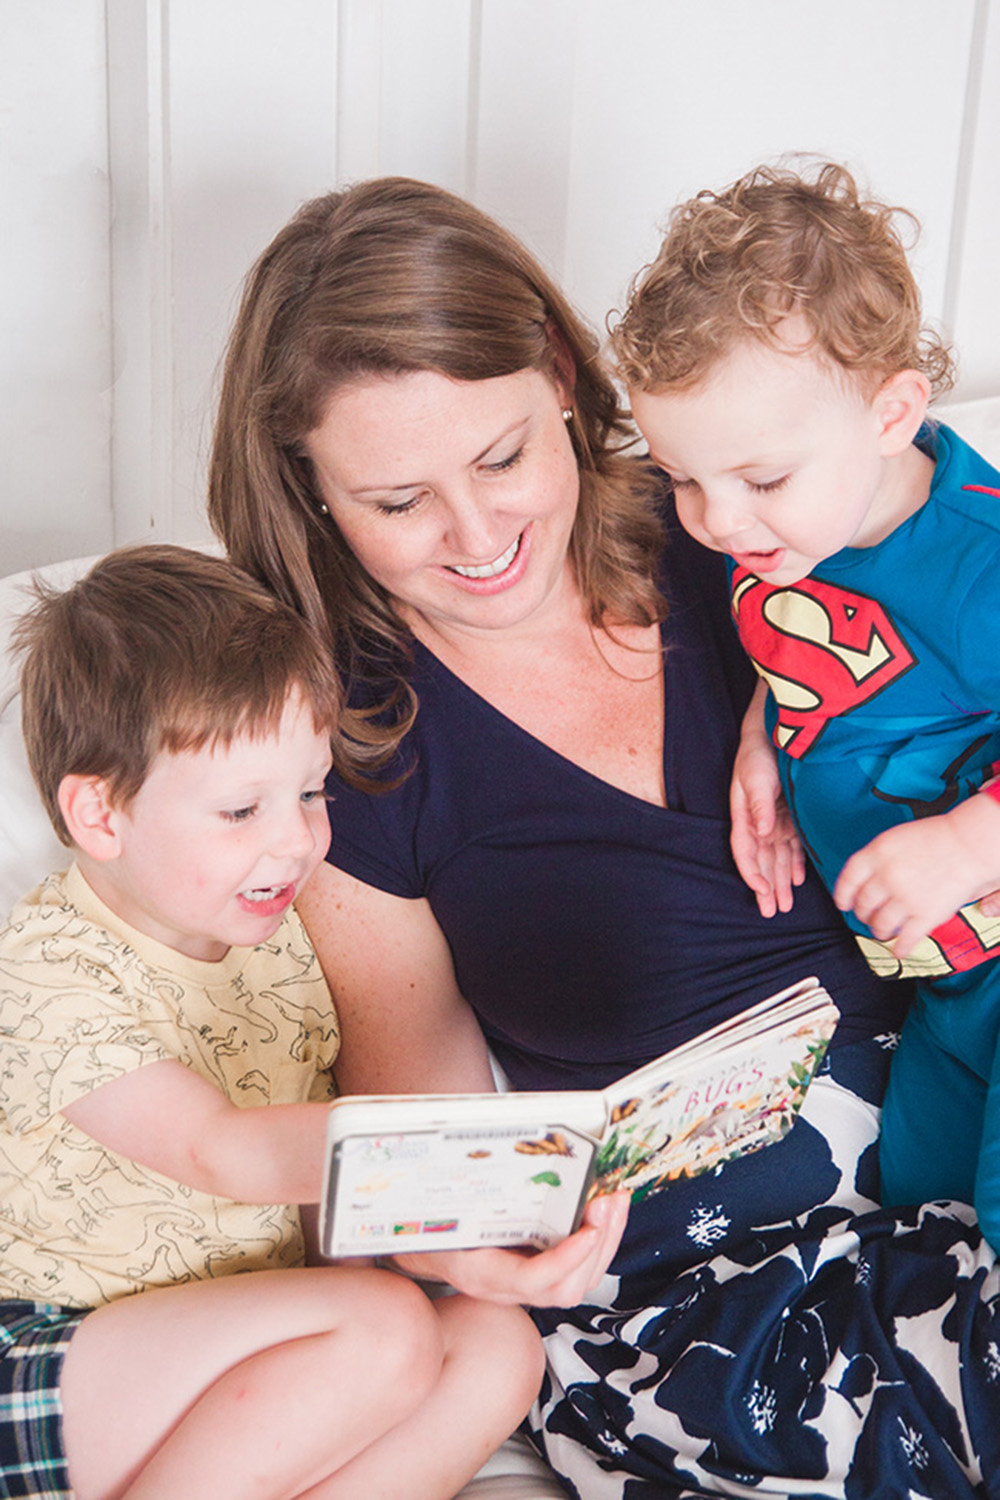 Homeschooling mom settles in with the kids and a picture book